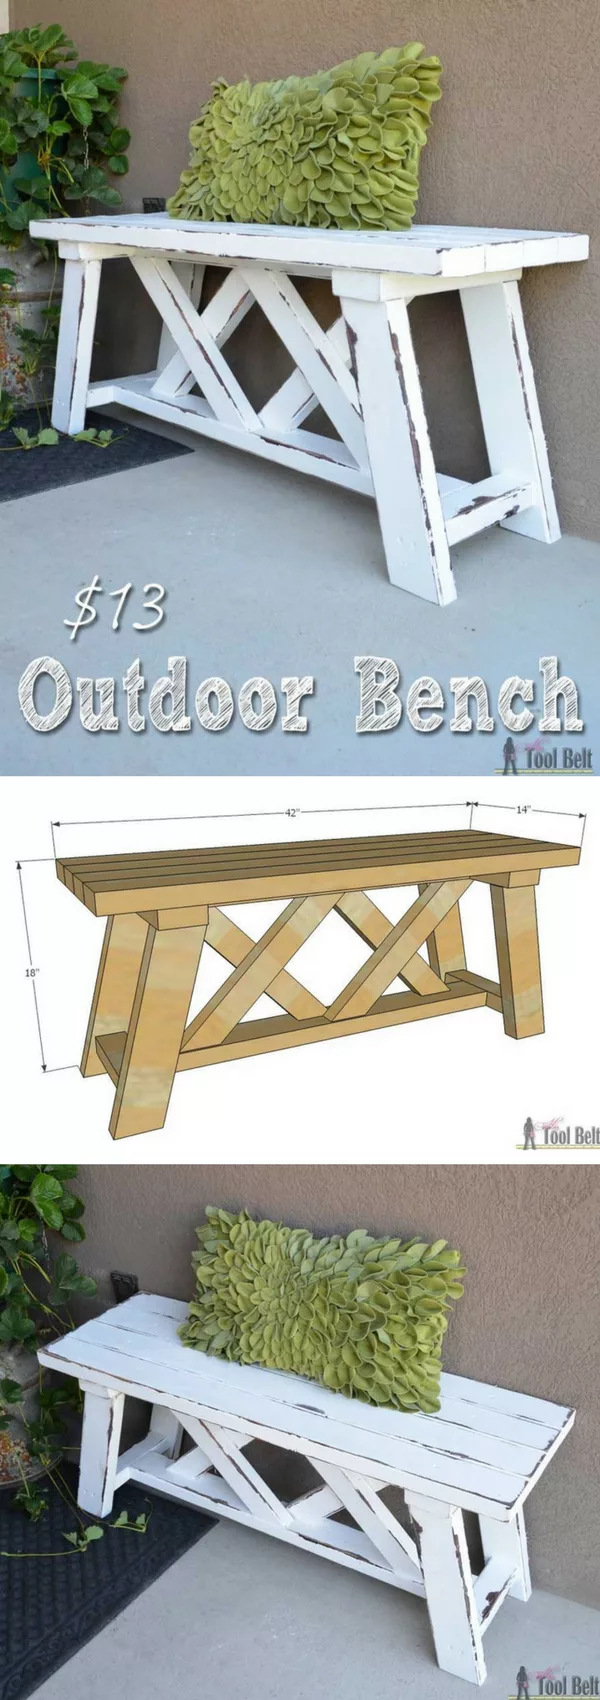 Check out the tutorial on how to make a DIY outdoor bench